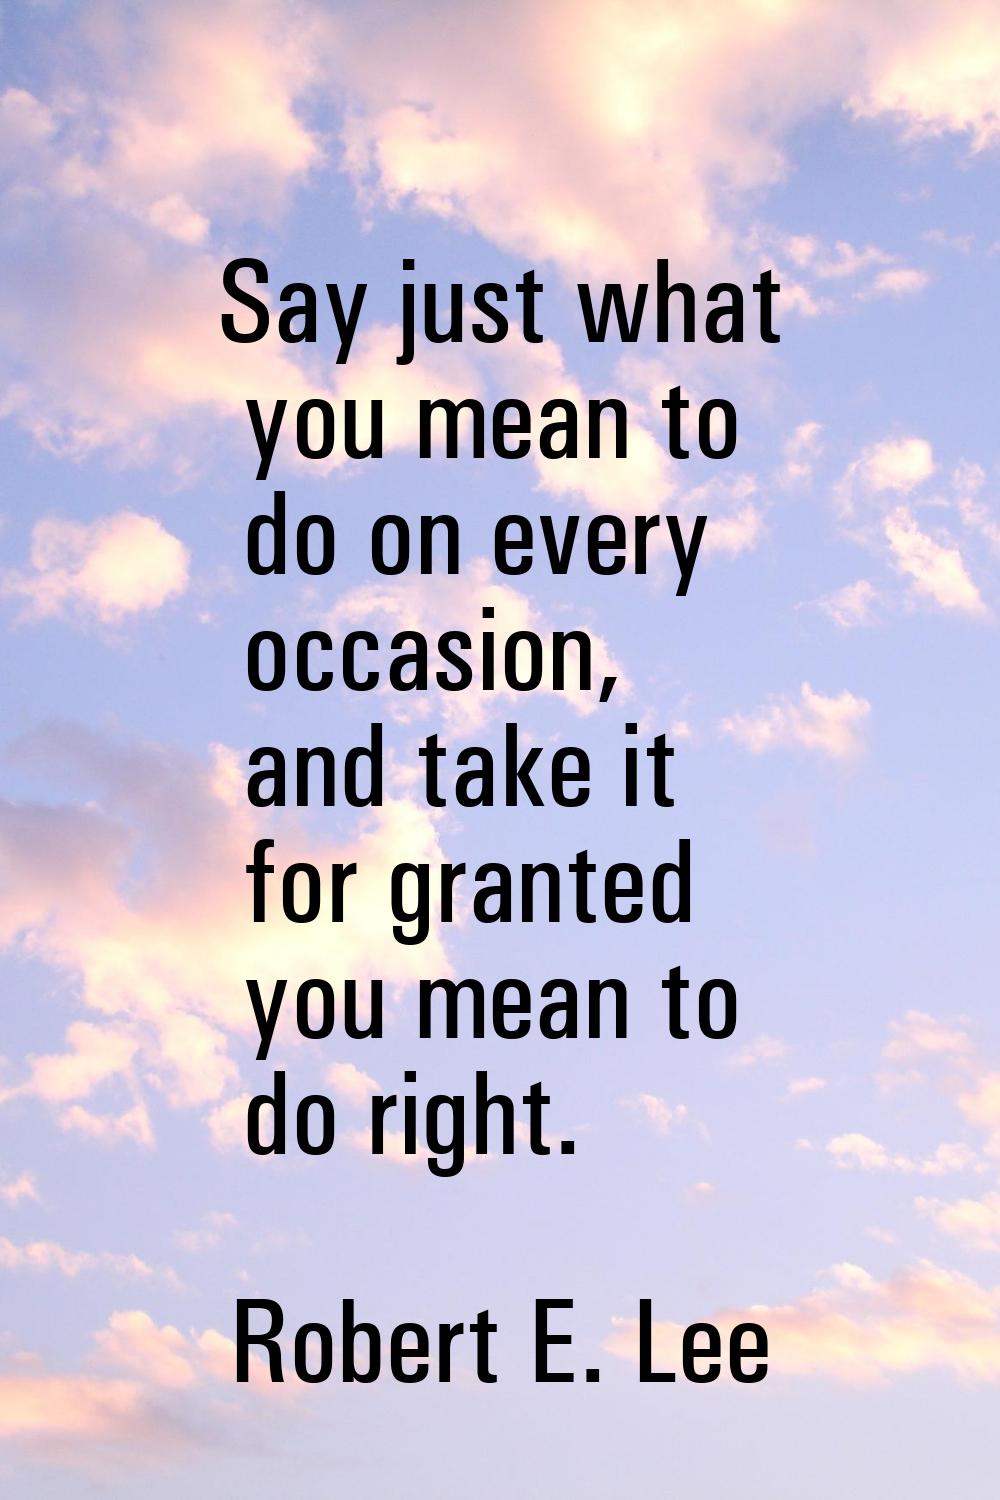 Say just what you mean to do on every occasion, and take it for granted you mean to do right.